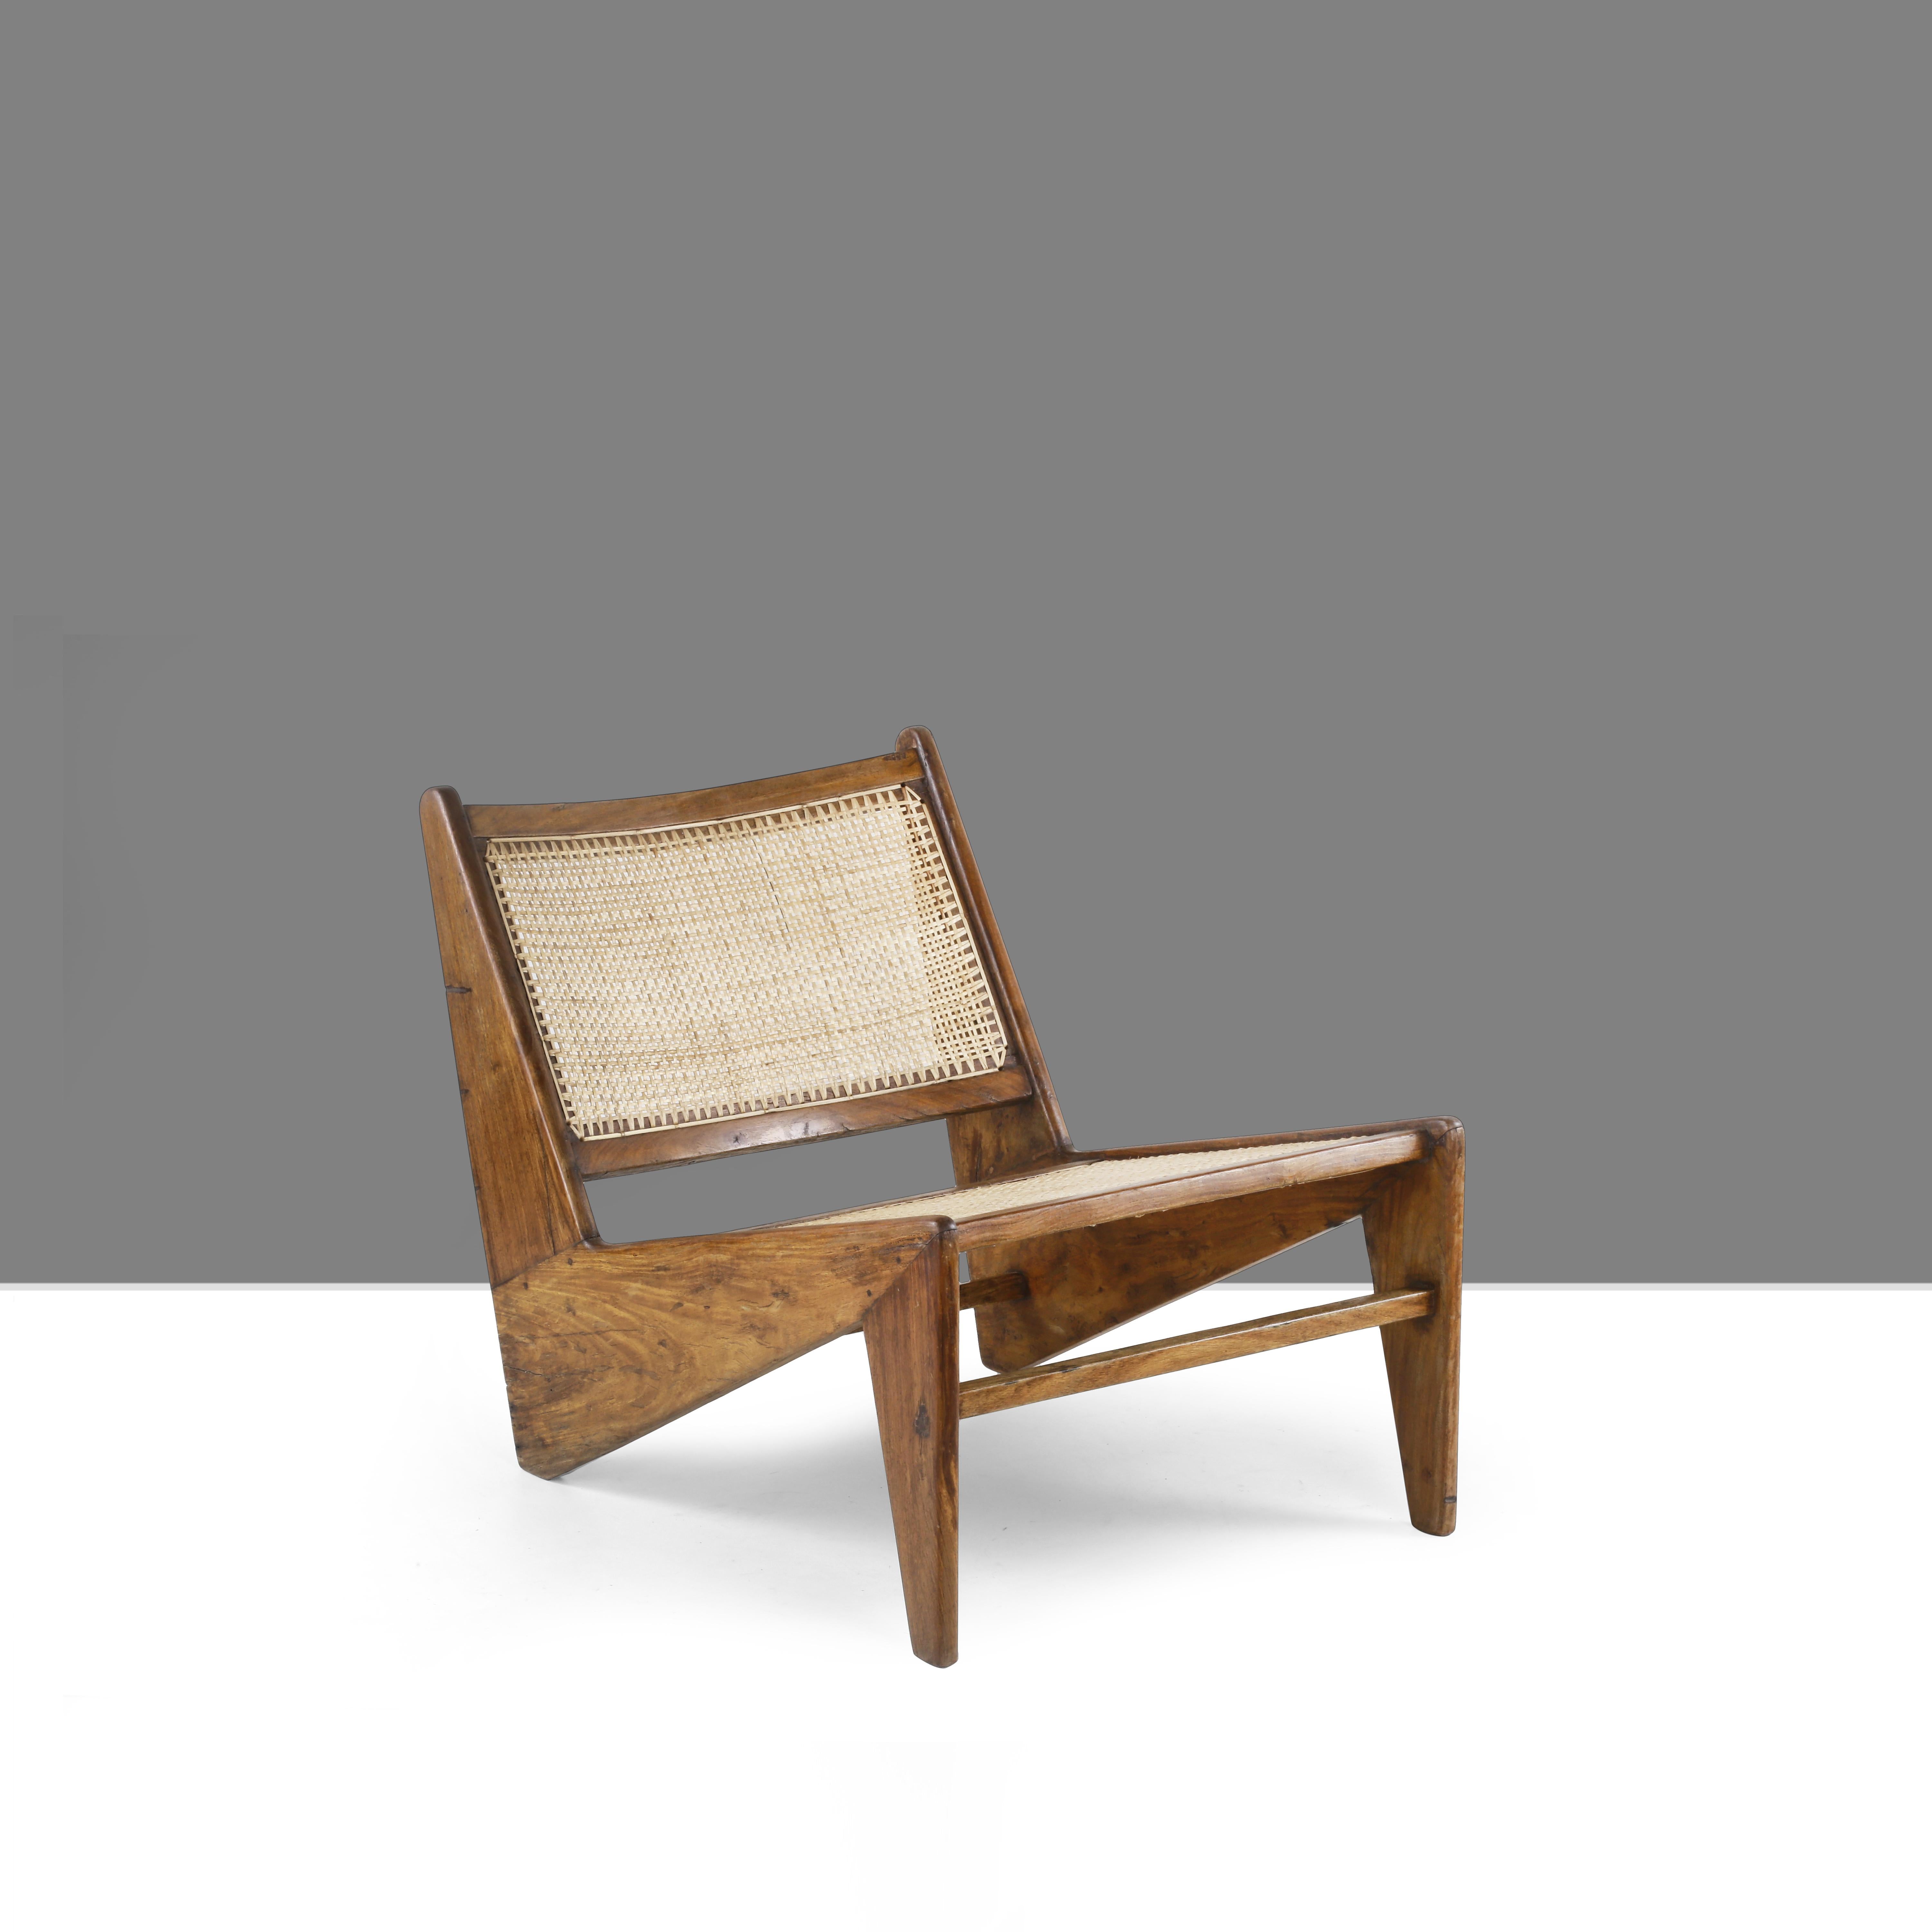 This chair is not only a fantastic piece, it’s a design icon. Finally, it’s one of the most famous items of all Chandigarh items. It is raw in its simplicity, embodying an expressing nonchalance. The kangaroo chair has a very simple shape, almost